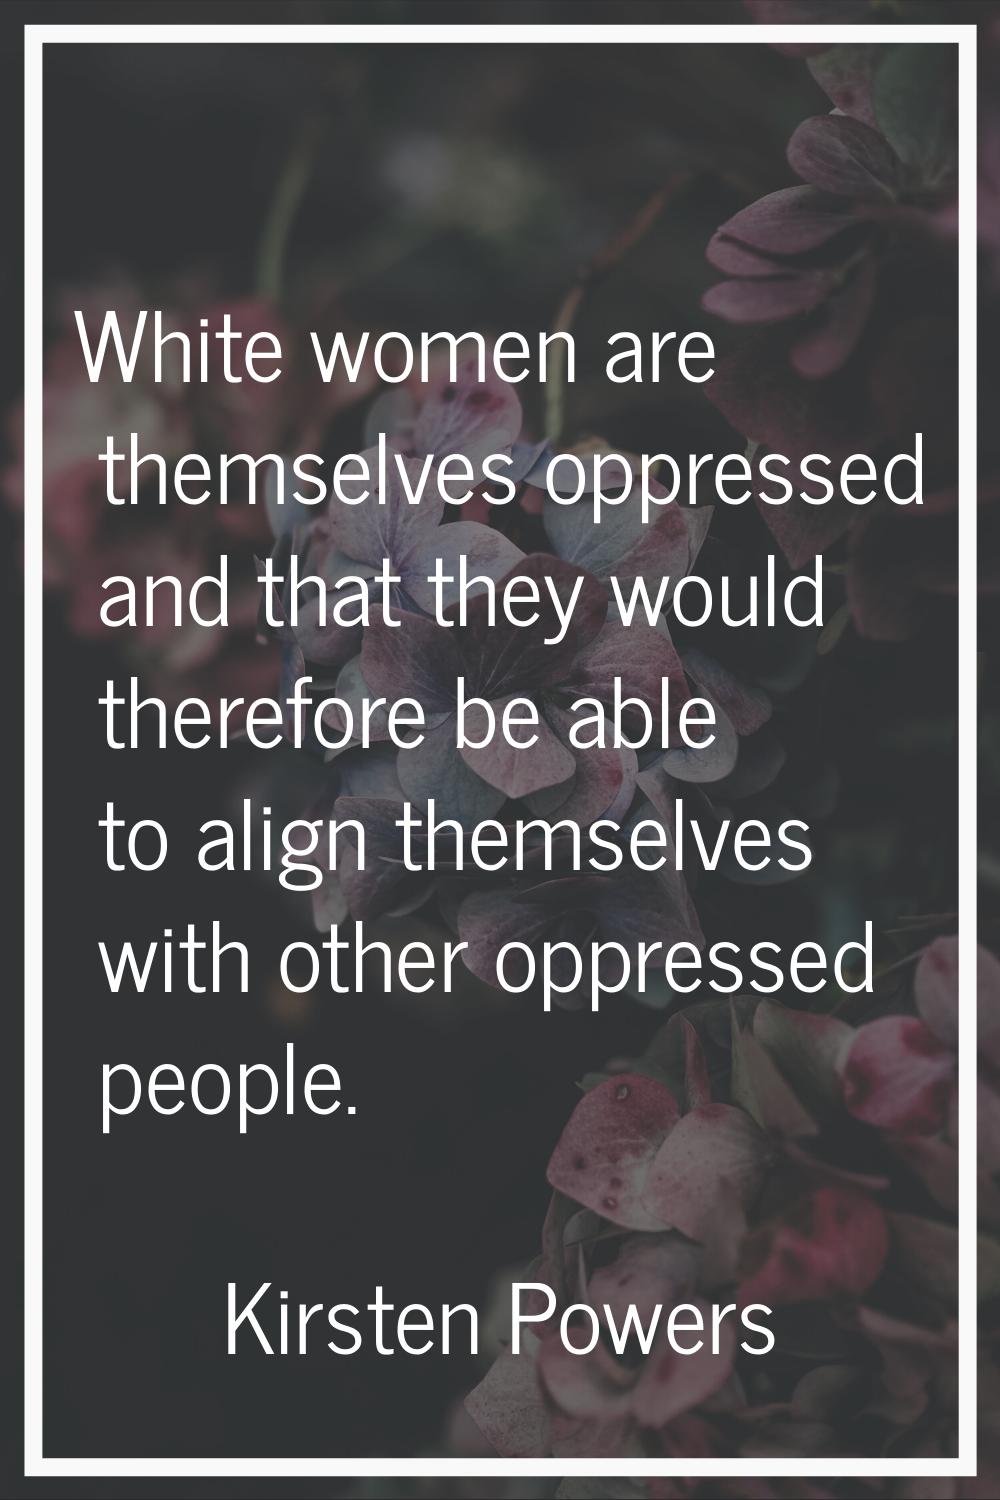 White women are themselves oppressed and that they would therefore be able to align themselves with